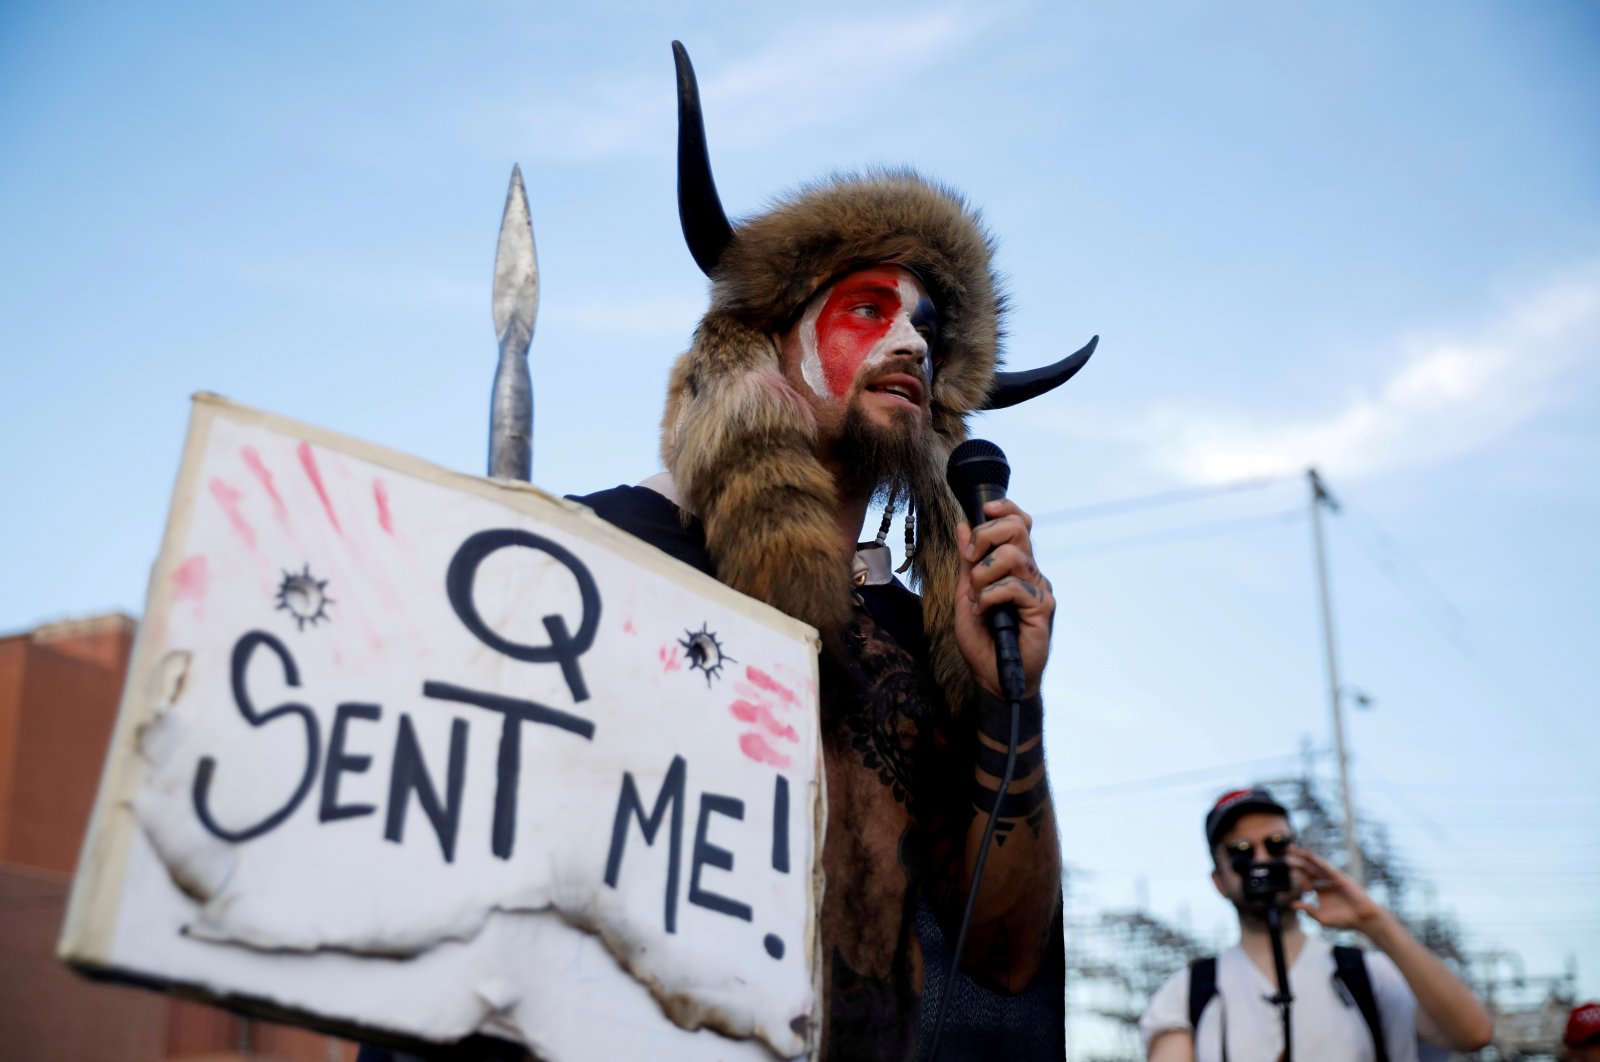 Jacob Chansley, holding a sign referencing QAnon, speaks as supporters of U.S. President Donald Trump gather to protest about the early results of the 2020 presidential election, in front of the Maricopa County Tabulation and Election Center, in Phoenix, Arizona, U.S., November 5, 2020. (REUTERS File Photo)